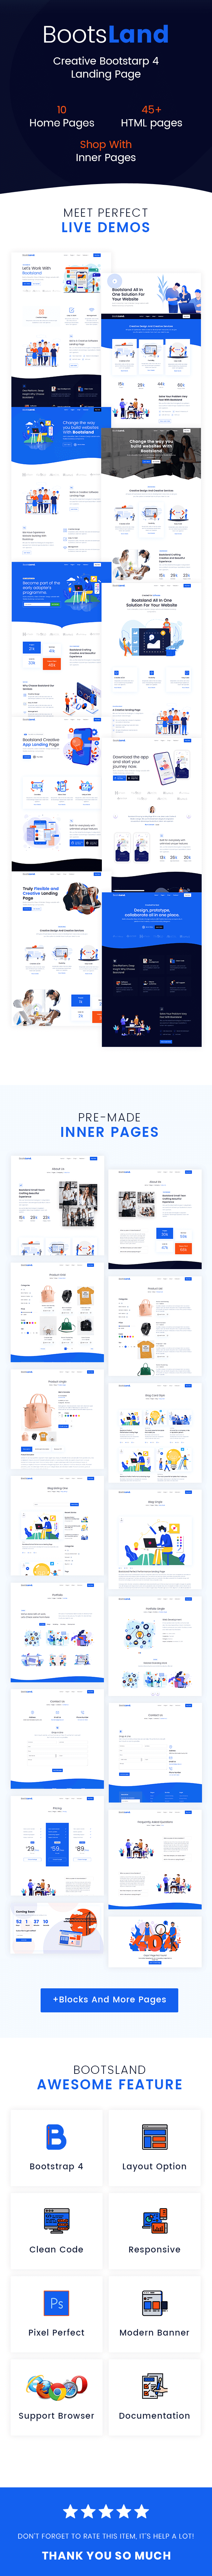 Bootsland - Creative Bootstrap 4 Landing Page - 2